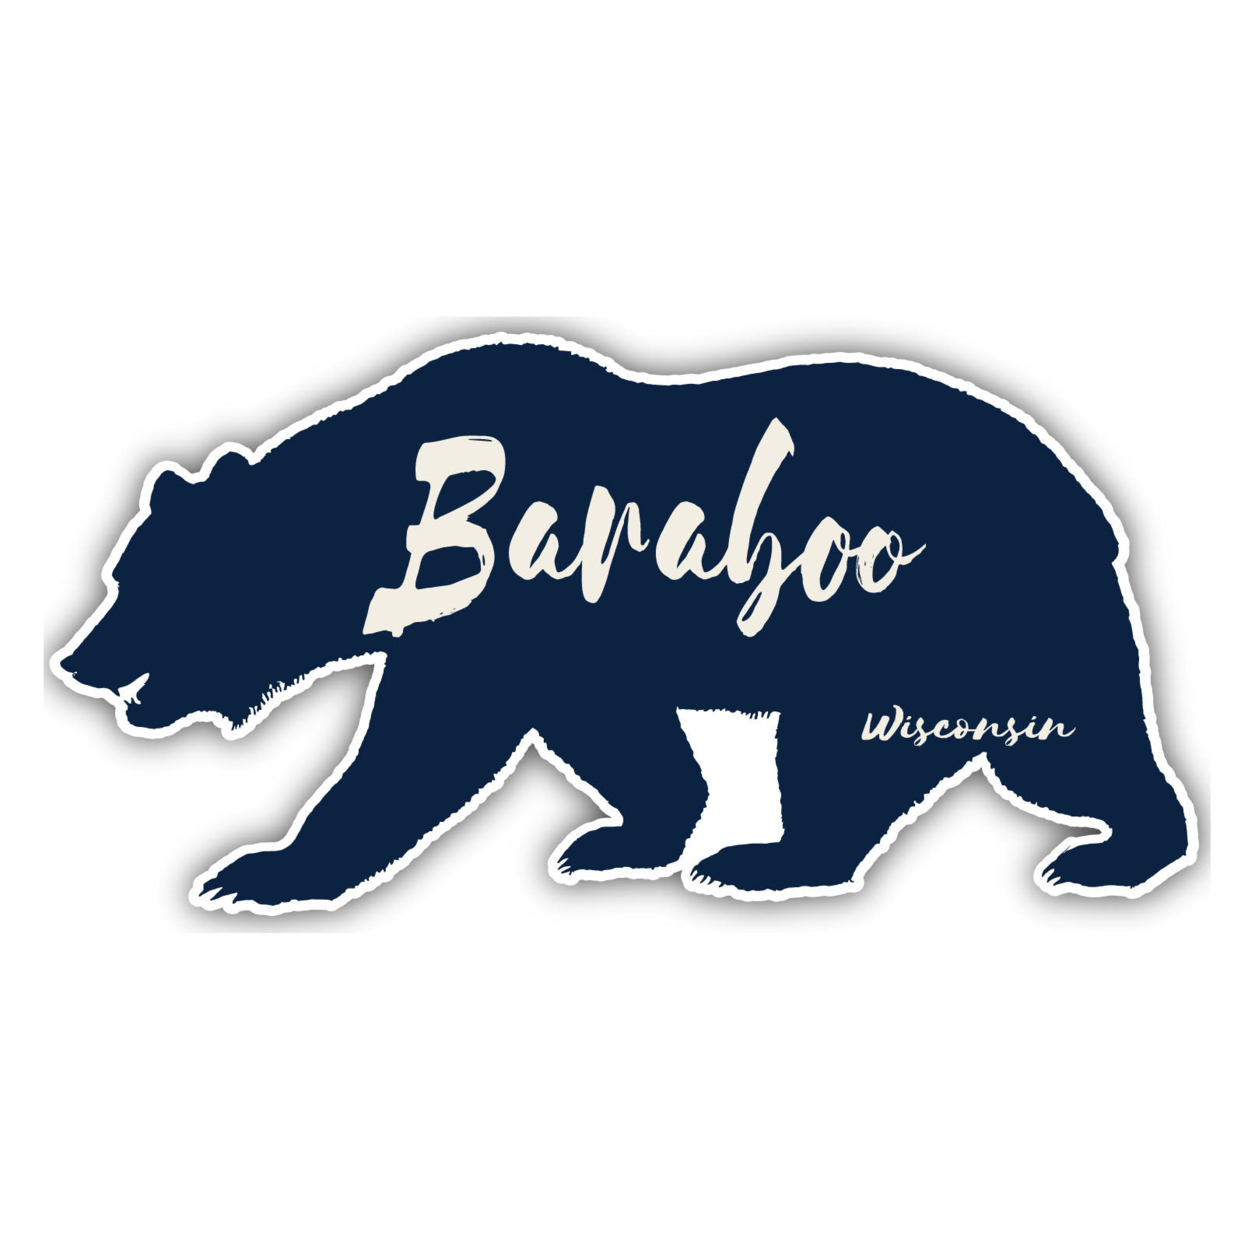 Baraboo Wisconsin Souvenir Decorative Stickers (Choose Theme And Size) - 4-Pack, 2-Inch, Bear